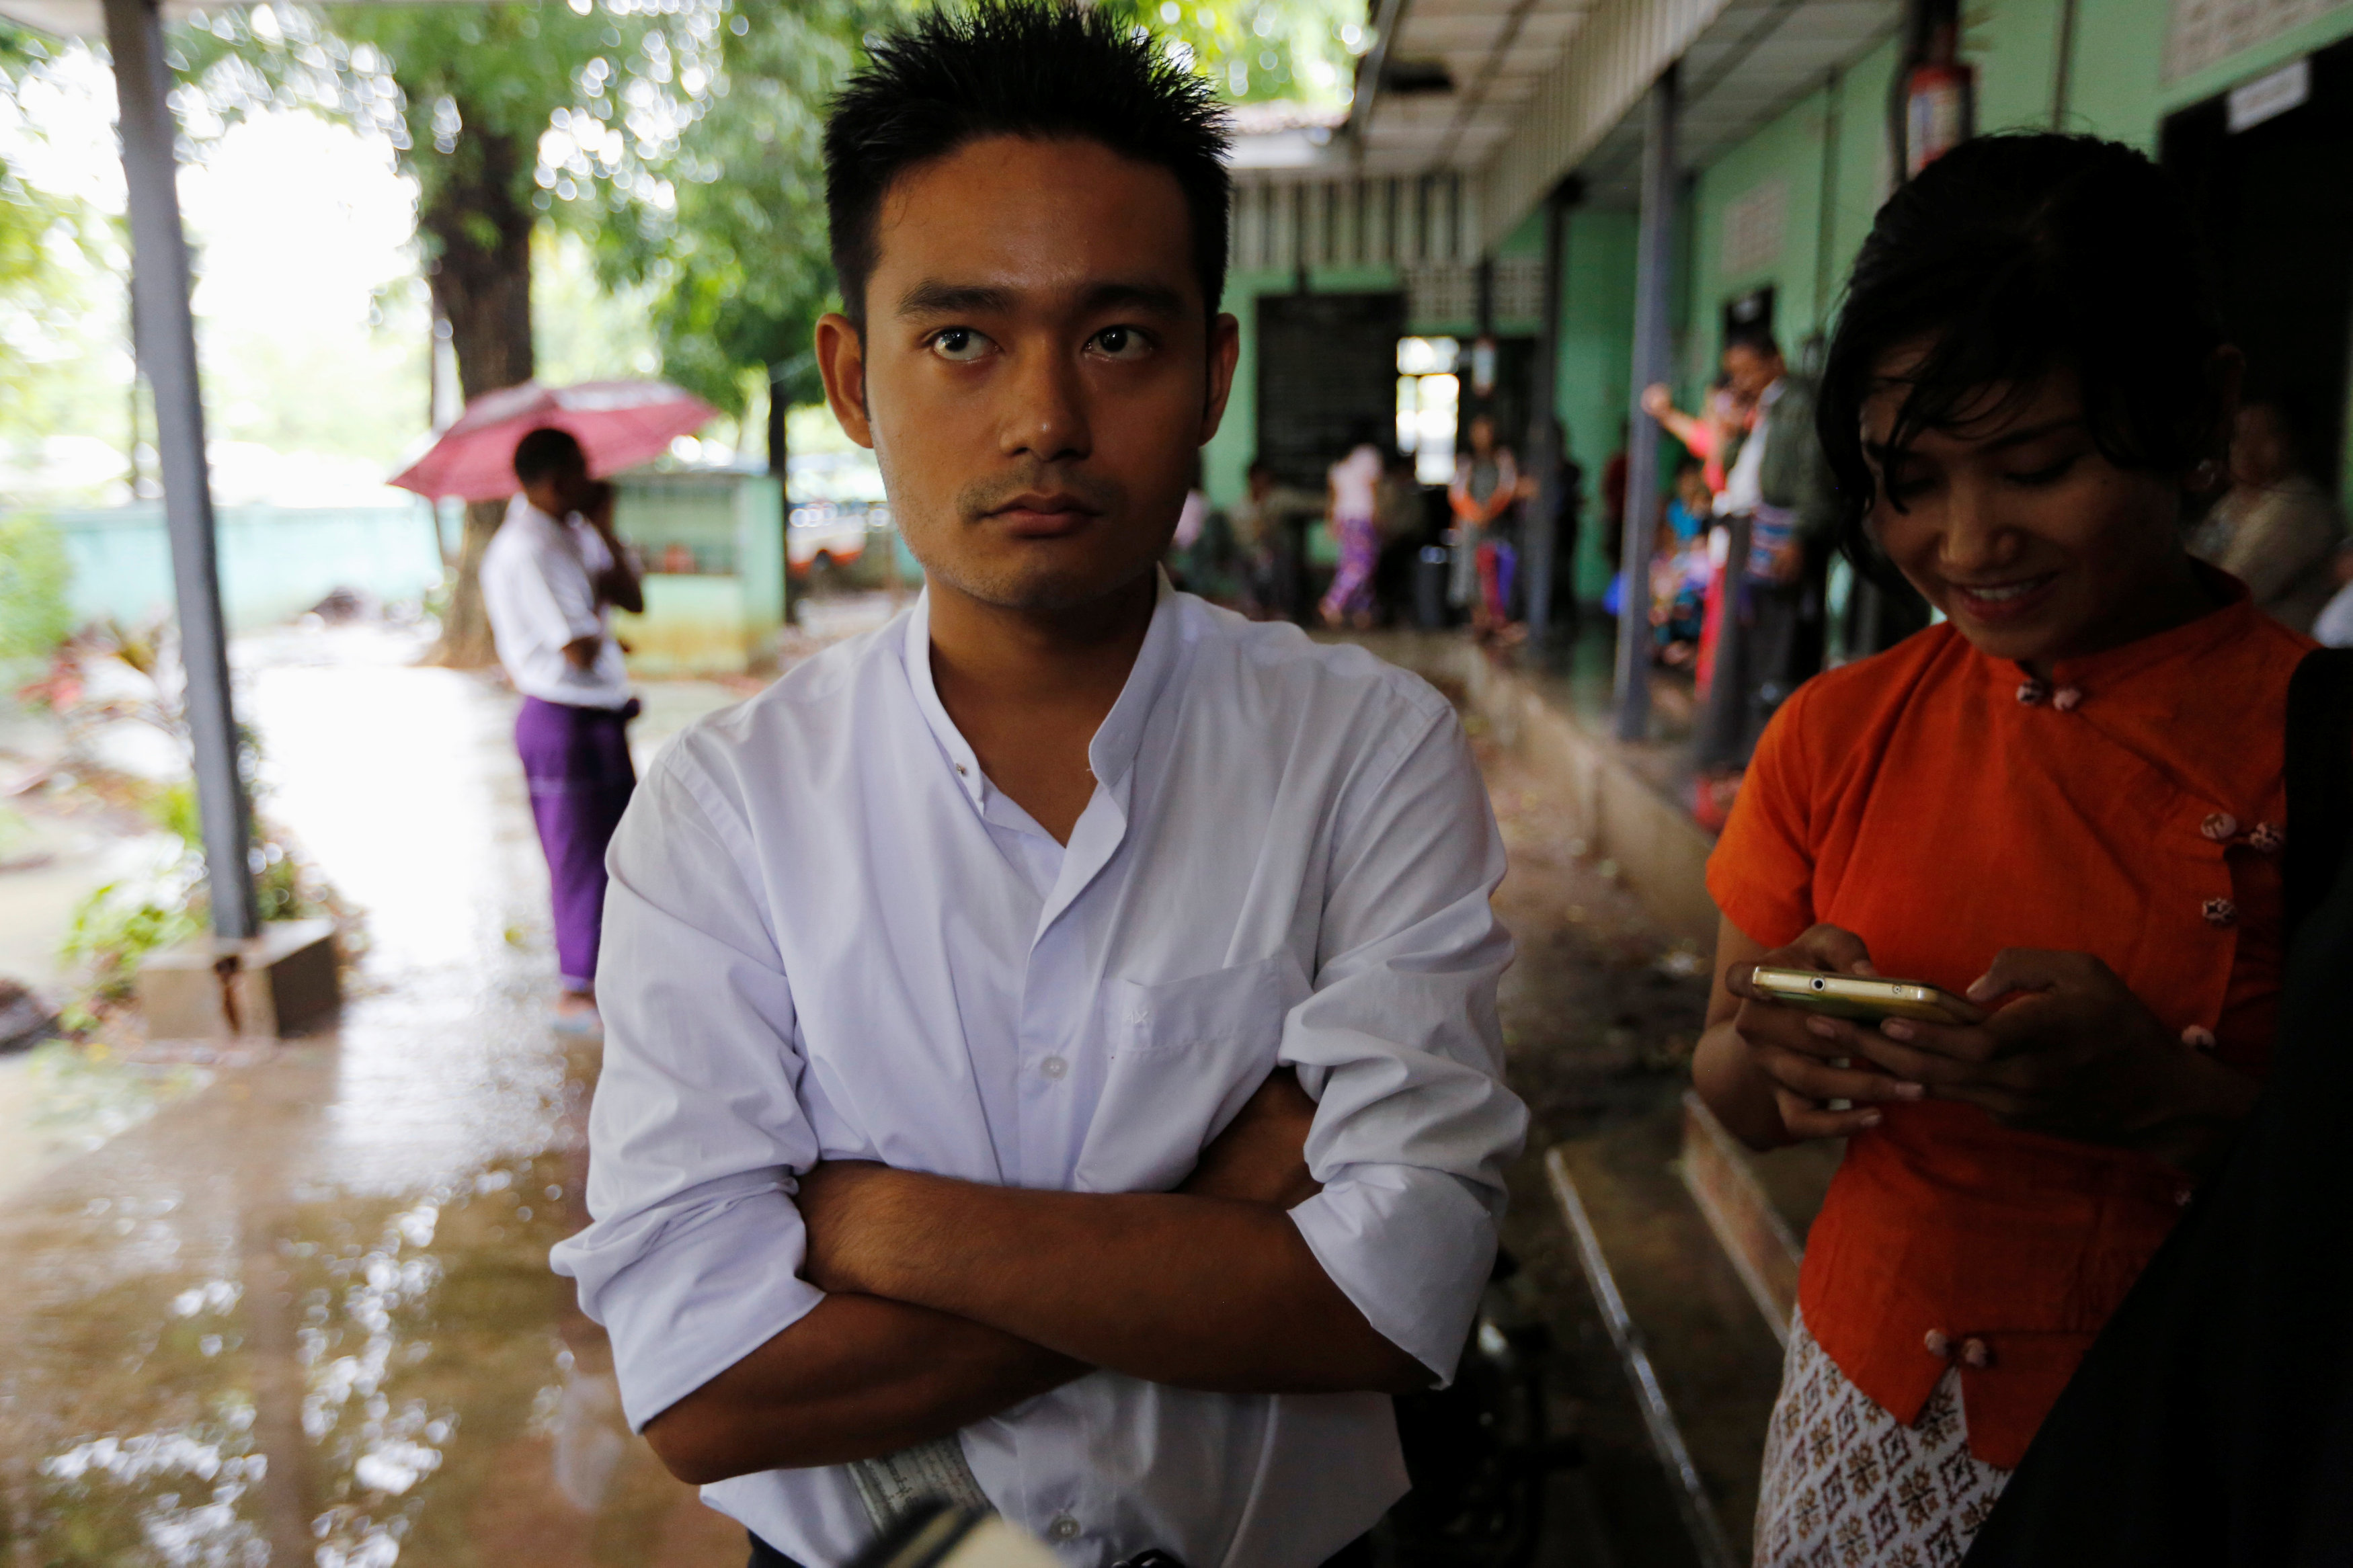 Myanmar poet's jail term "like from the old days"